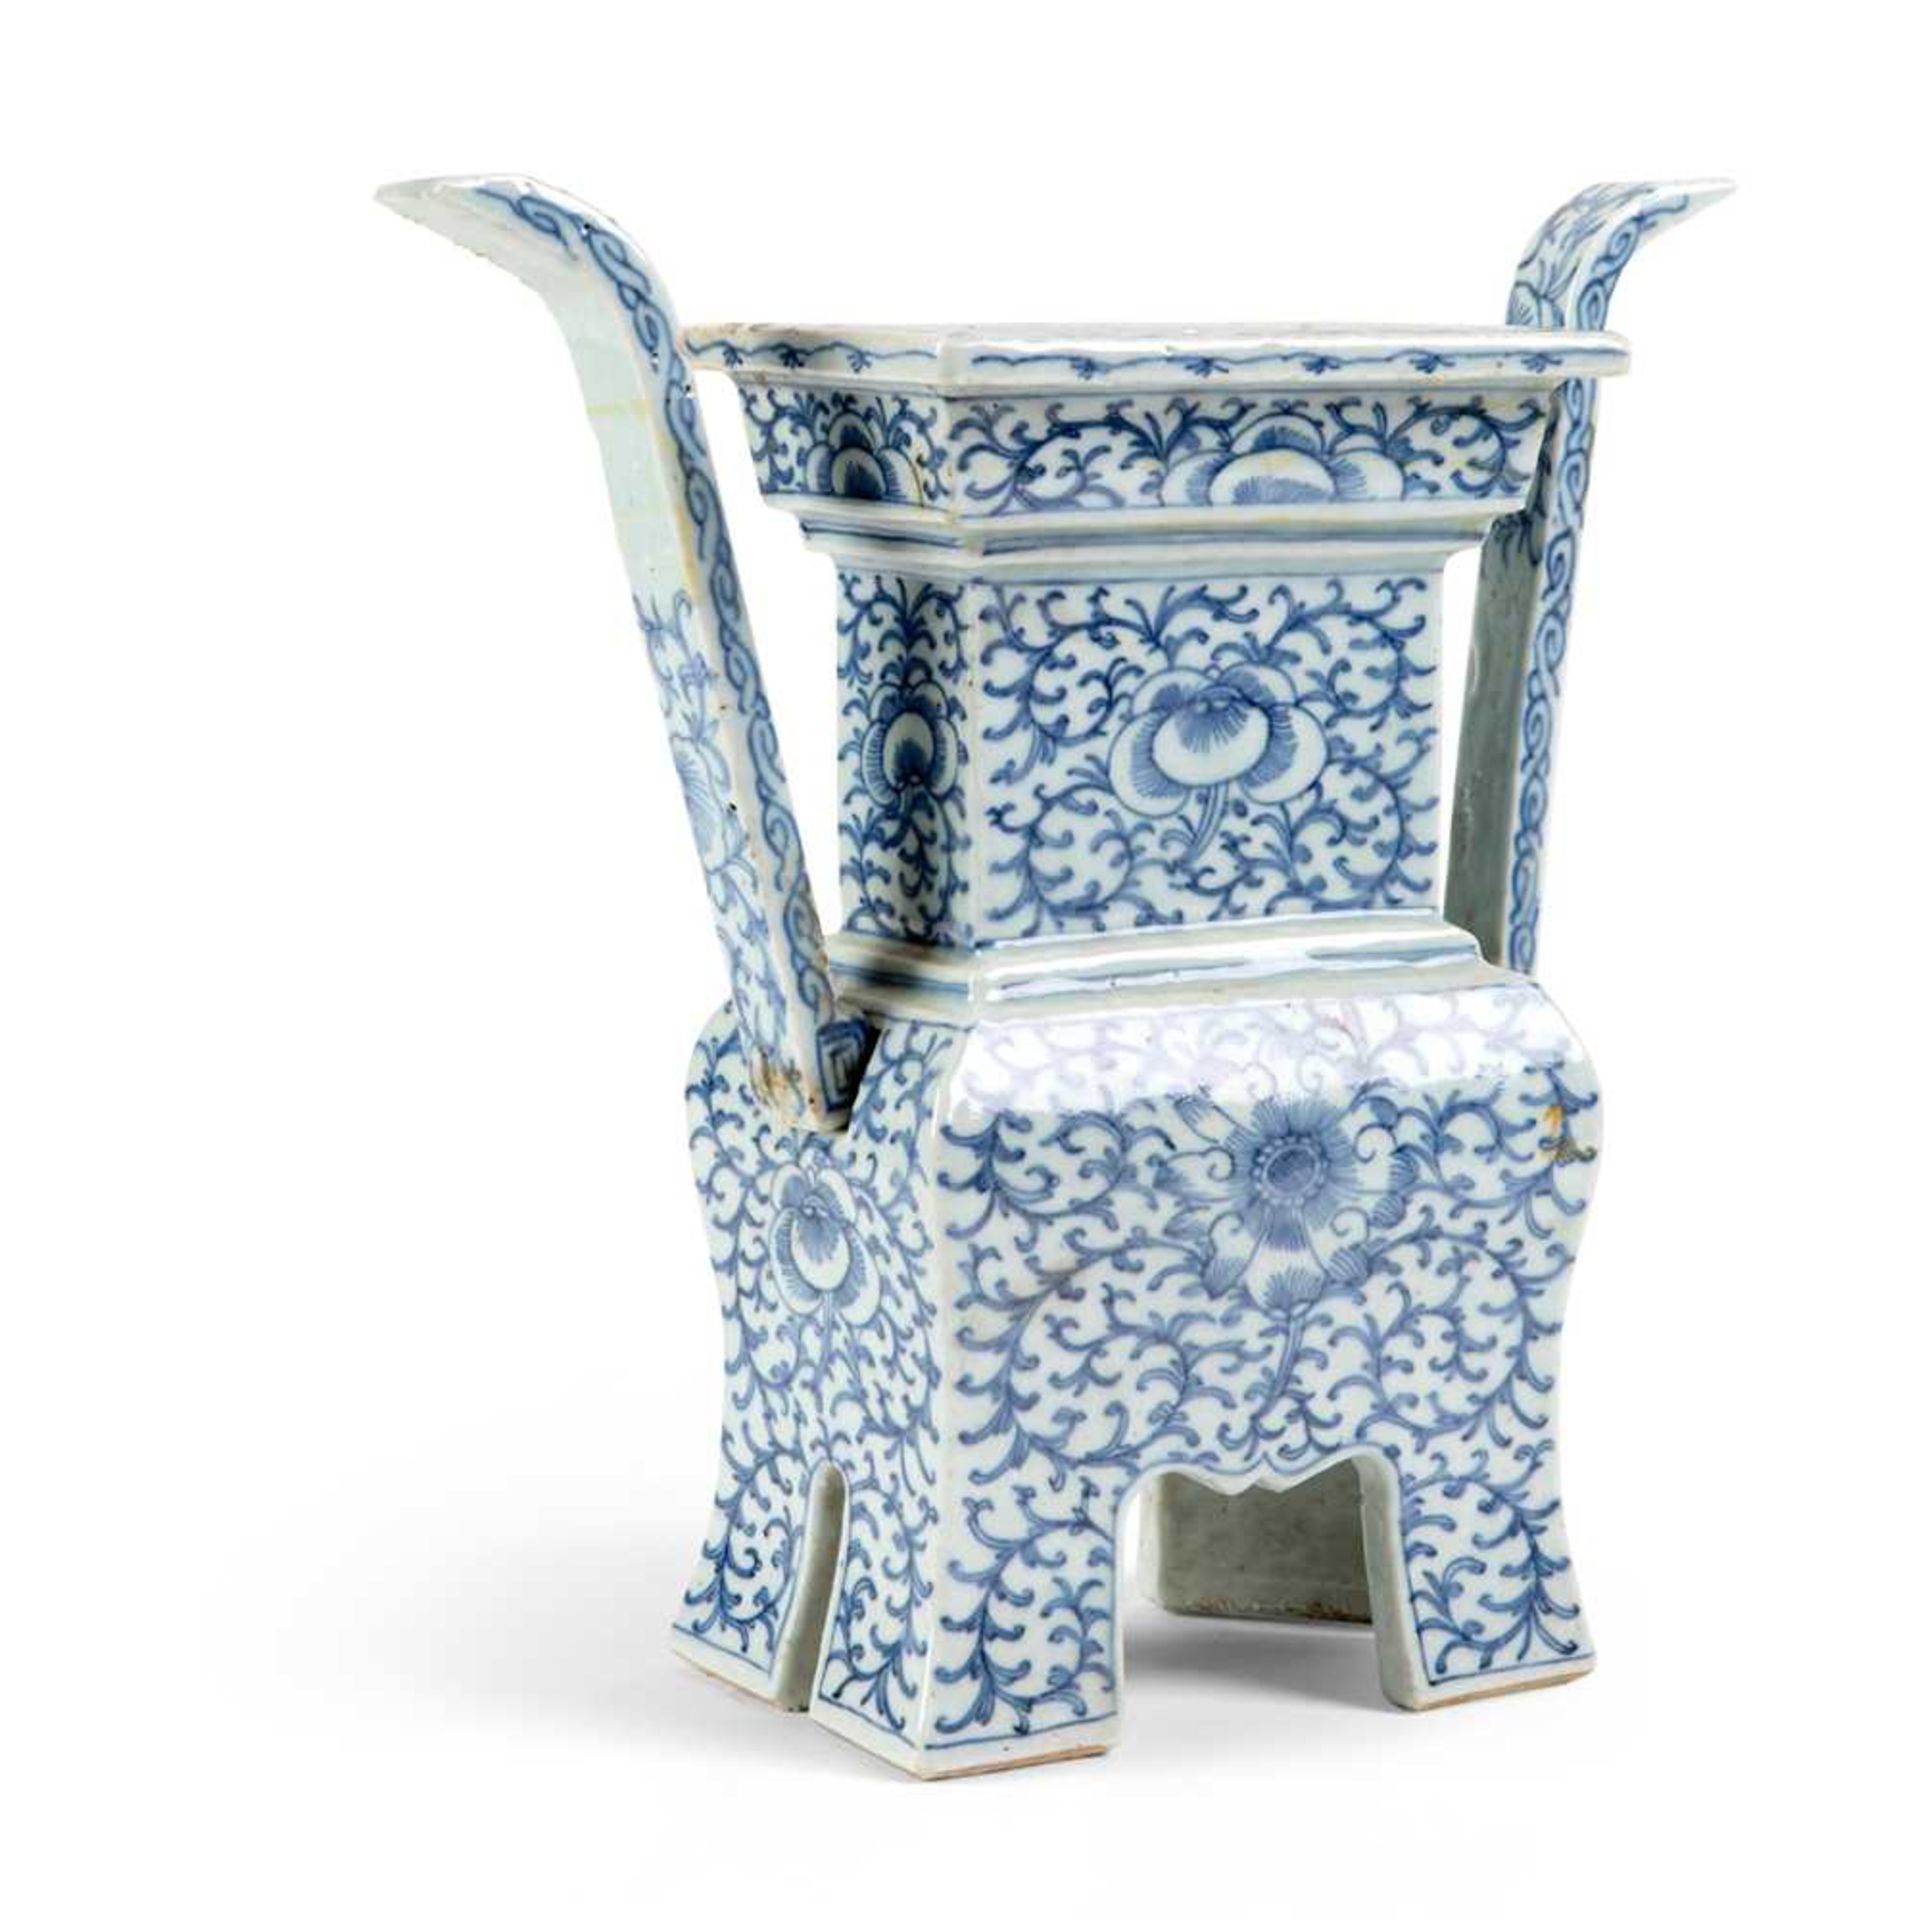 BLUE AND WHITE 'DING' CENSER QING DYNASTY, JIAQING PERIOD